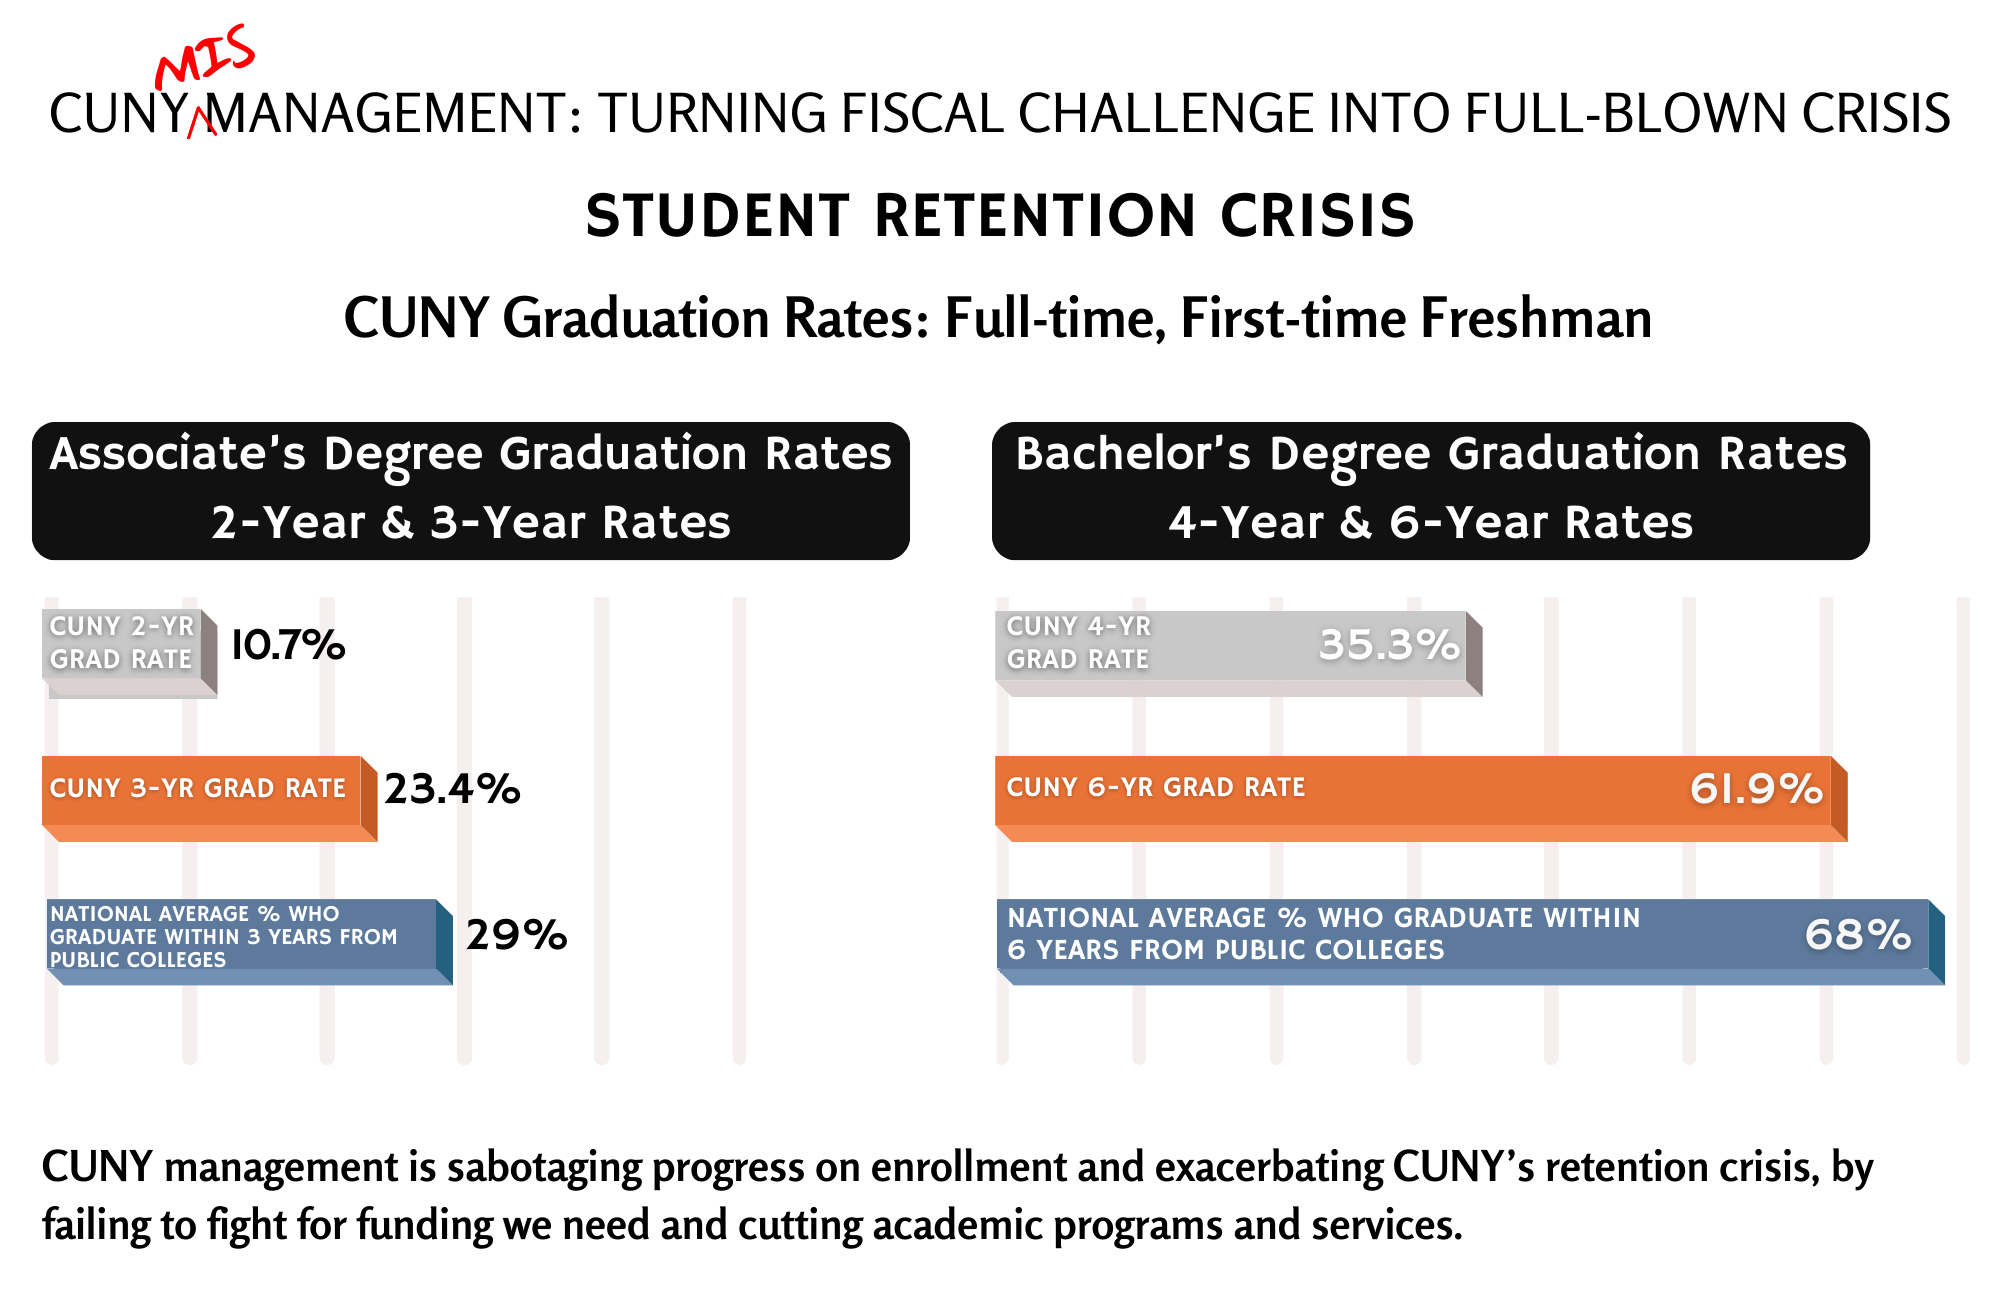 CUNY management is sabotaging progress on enrollment and exacerbating CUNY’s retention crisis, by failing to fight for funding we need and cutting academic programs and services.